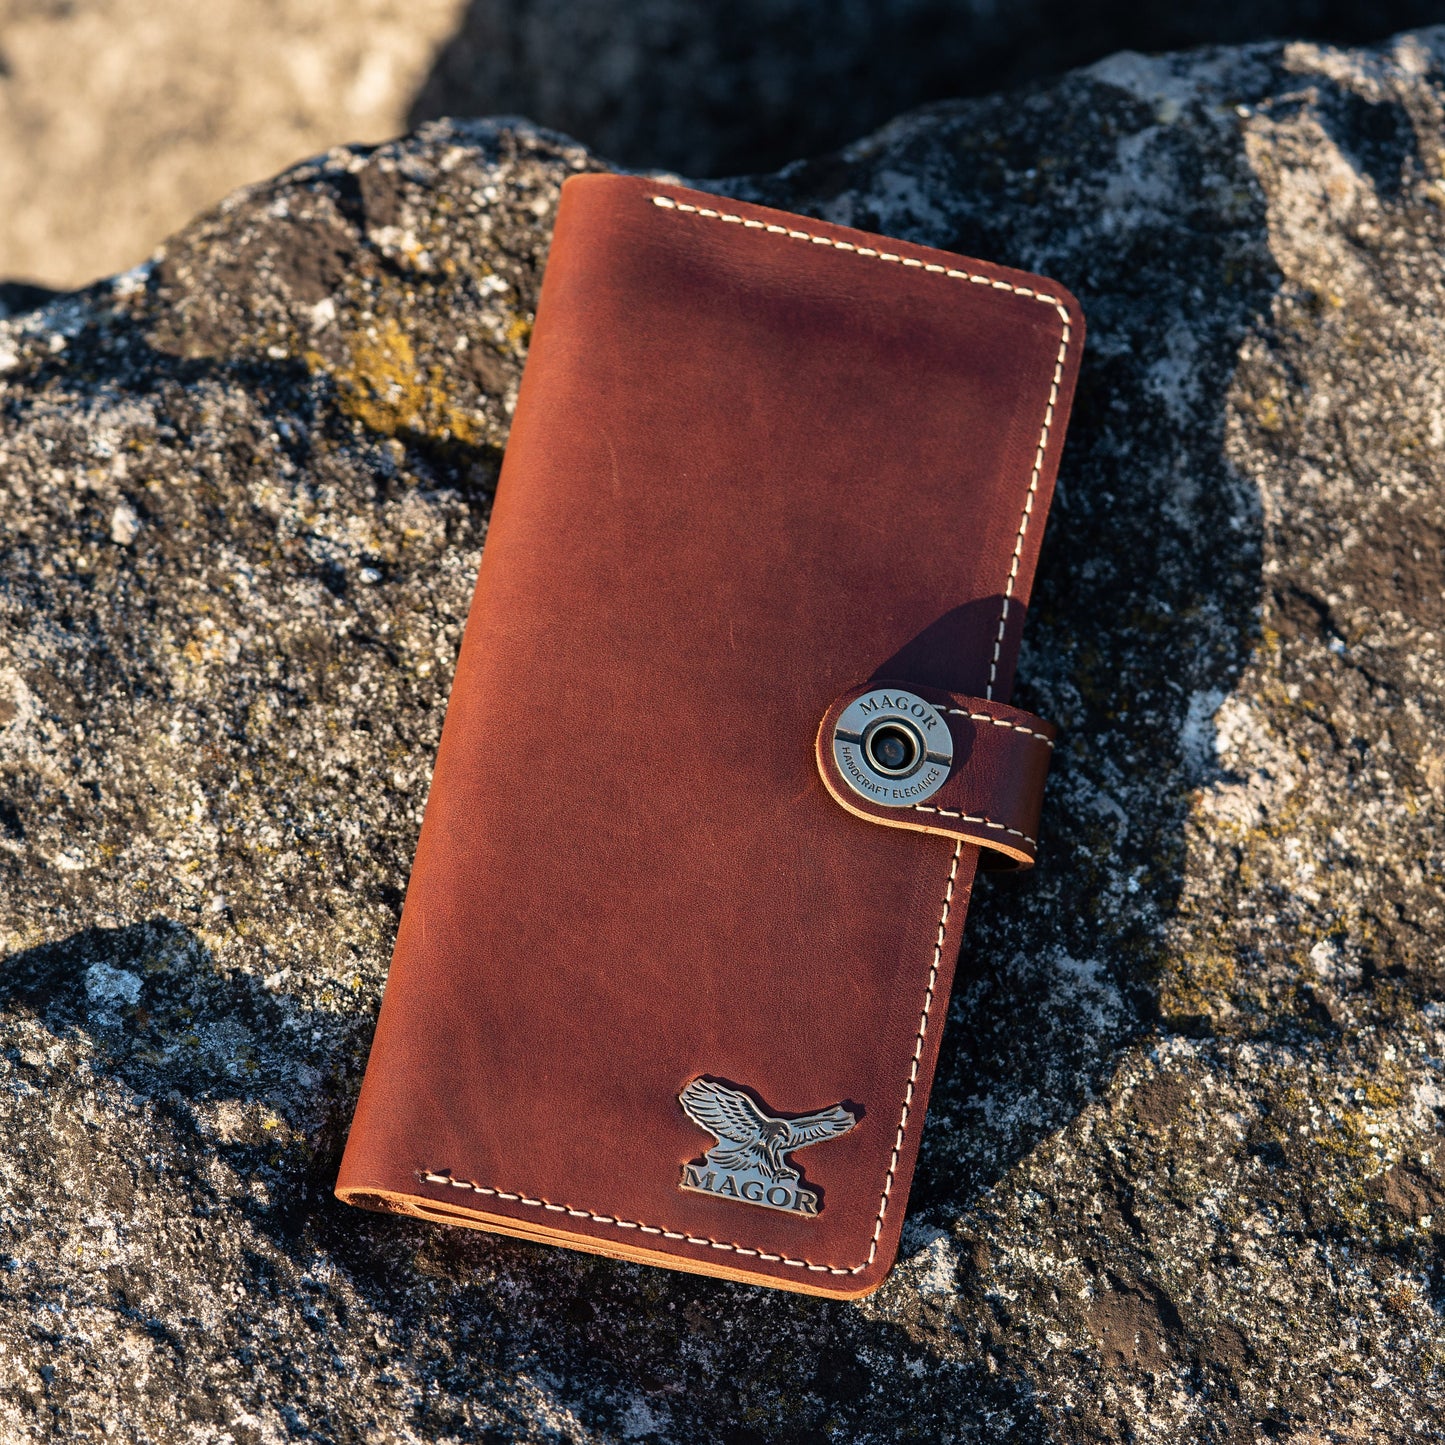 leather wallet | Long Leather Wallet With Card Holder | Coin Pocket | Genuine Leather Wallet | gift ideas